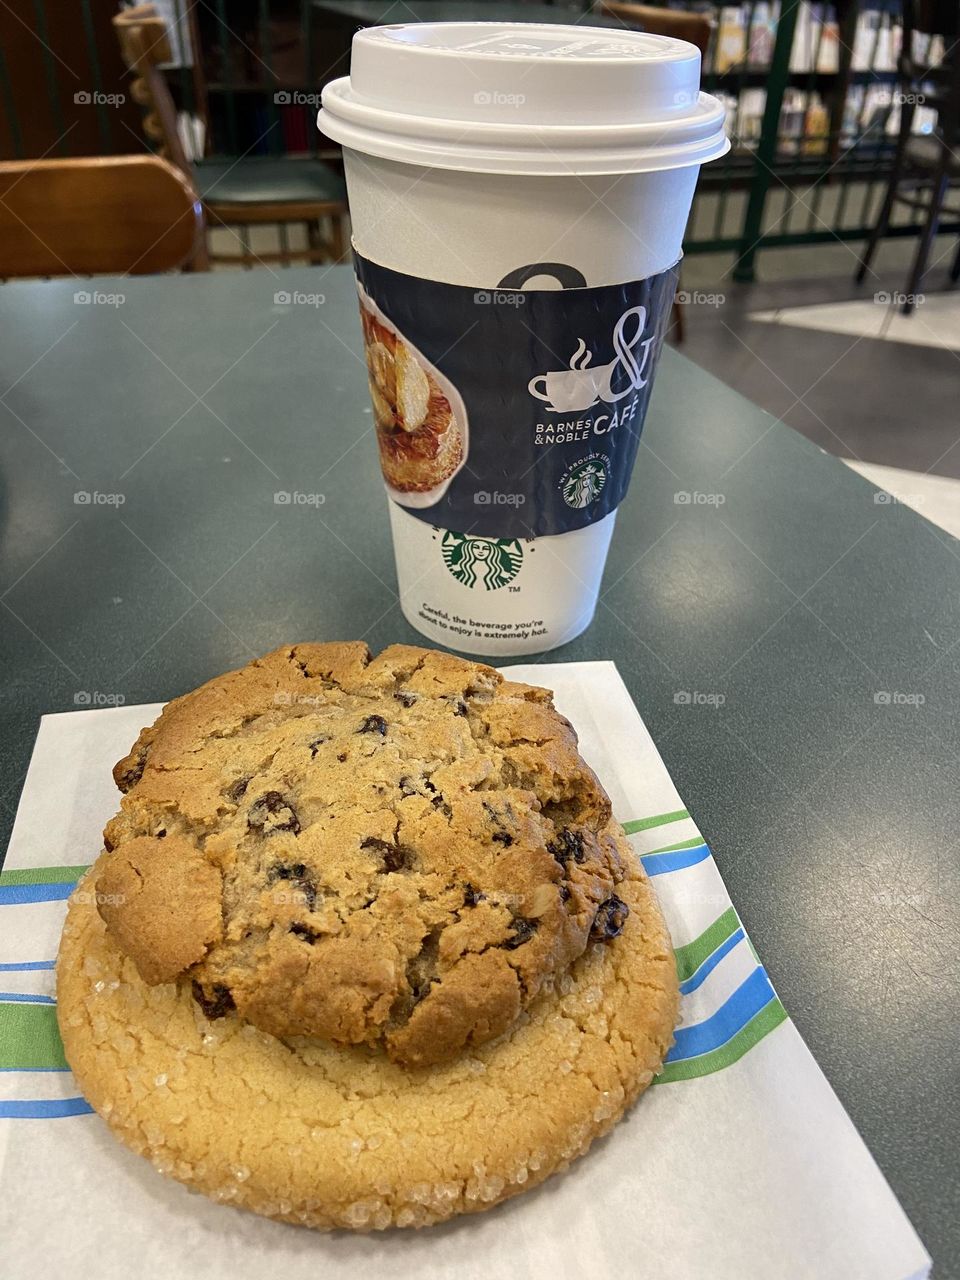 Two cookies, one oatmeal raisin and the other sugar, on top of a bakery bag, near a cup of tea. All were from the Barnes & Noble Cafe, a good place for a mid-day break, especially if you like a side of reading with your treats.